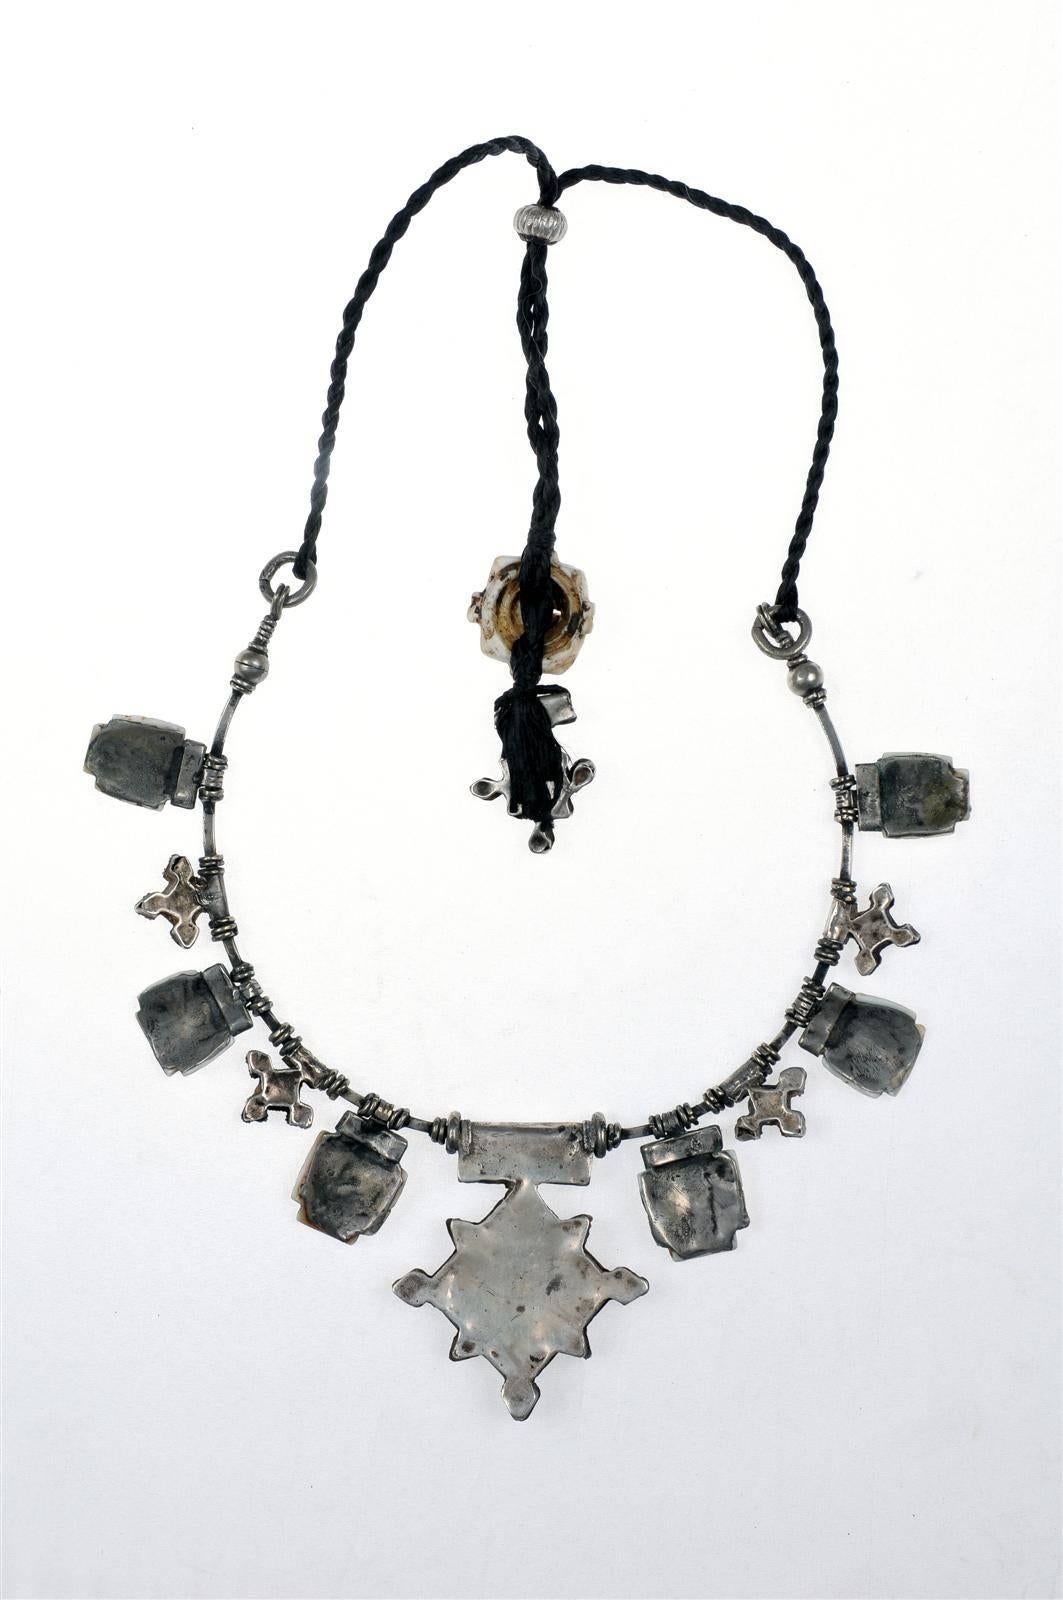 A custom made necklace by Famous Moroccan jeweler Chez Faouzi of Marrakech. Necklace is made of antique Moroccan silver and conus shell charms with the signature Faouzi back neck charm. Black chord is adjustable to 35.